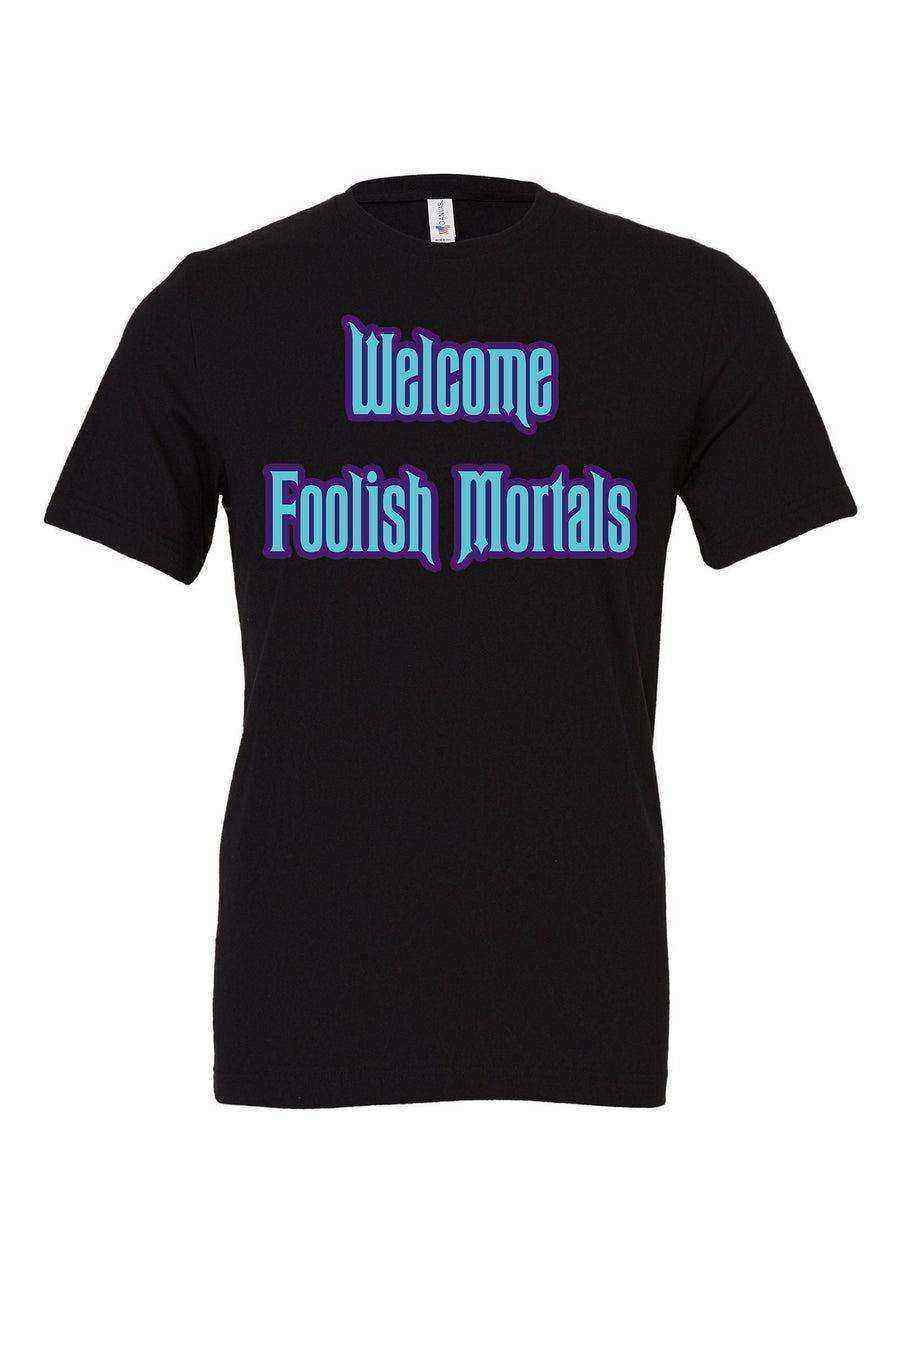 Youth | Welcome Foolish Mortals Shirt | Haunted Mansion Tee - Dylan's Tees